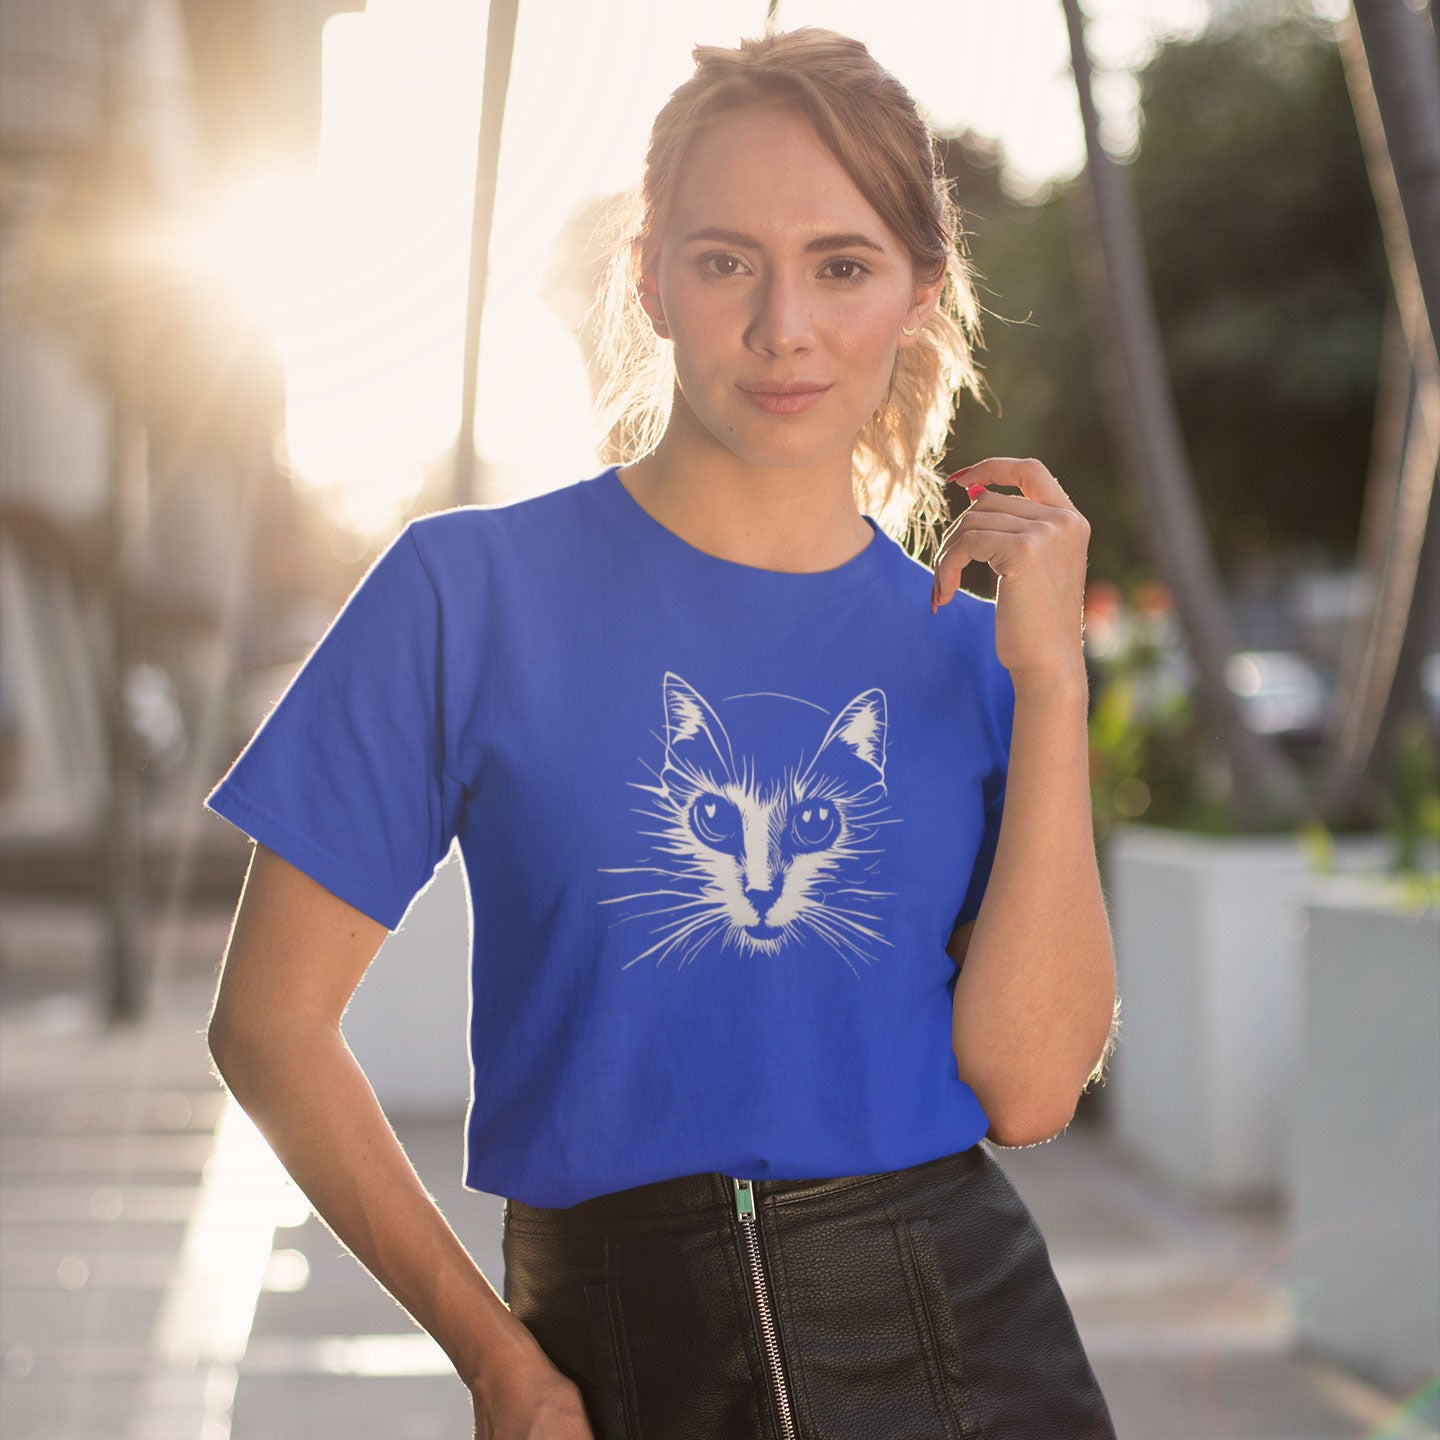 woman wearing a royal blue t-shirt with a cat print